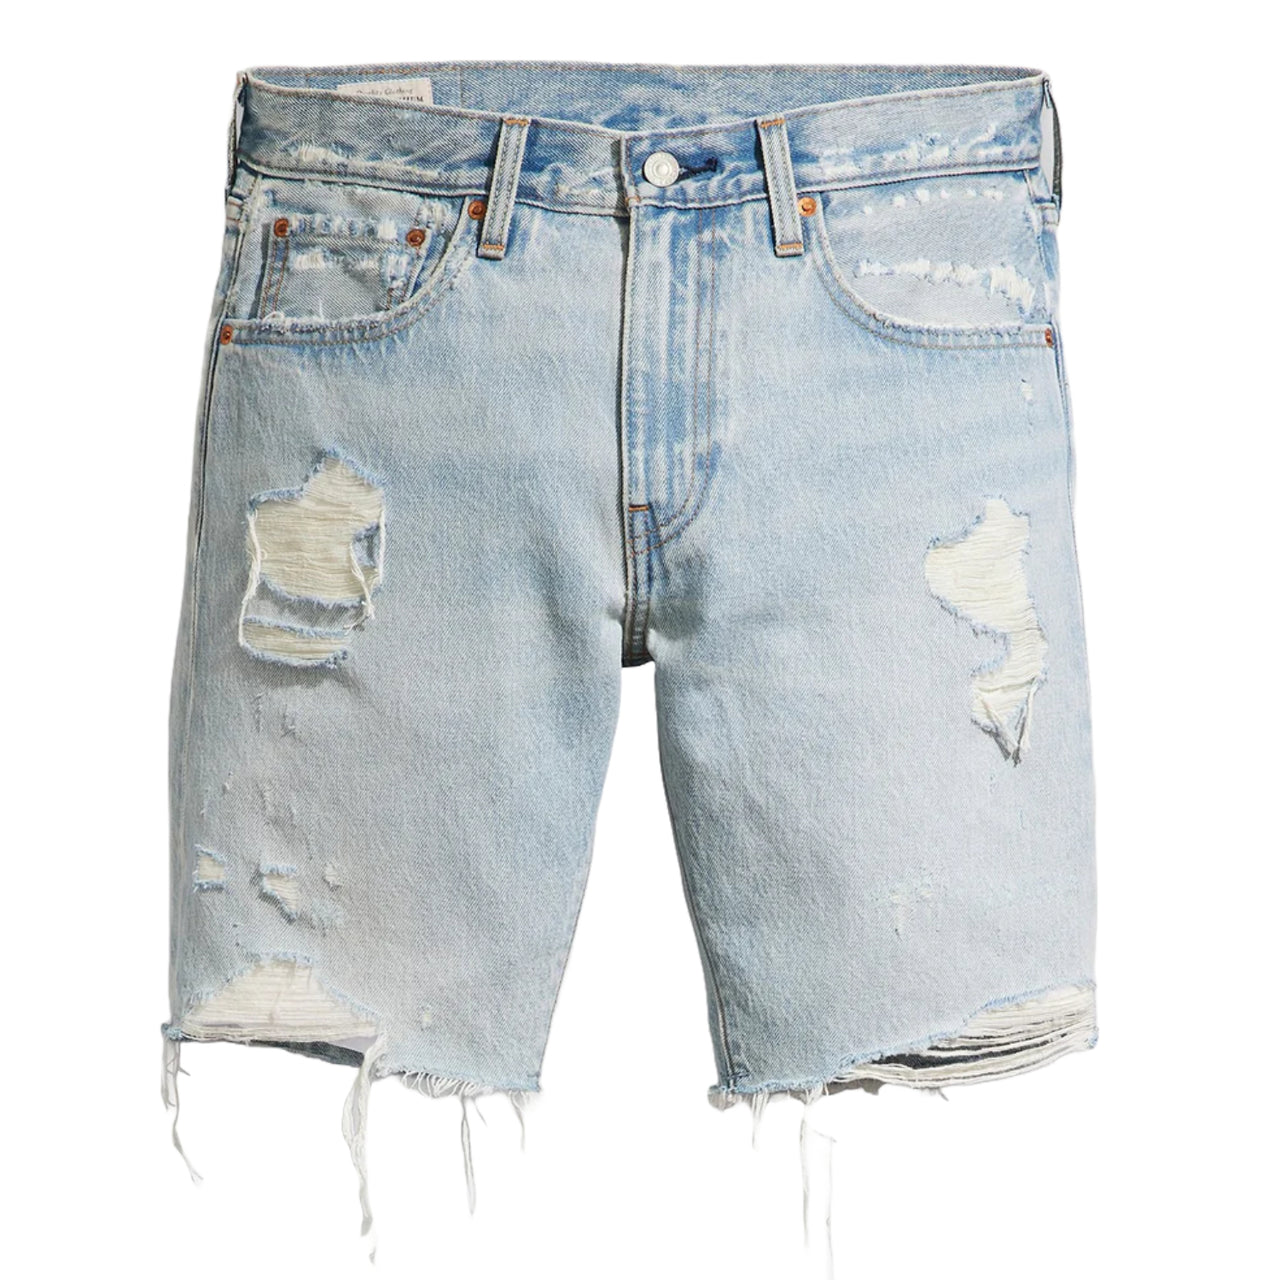 412 Slim Shorts | Get To The Check